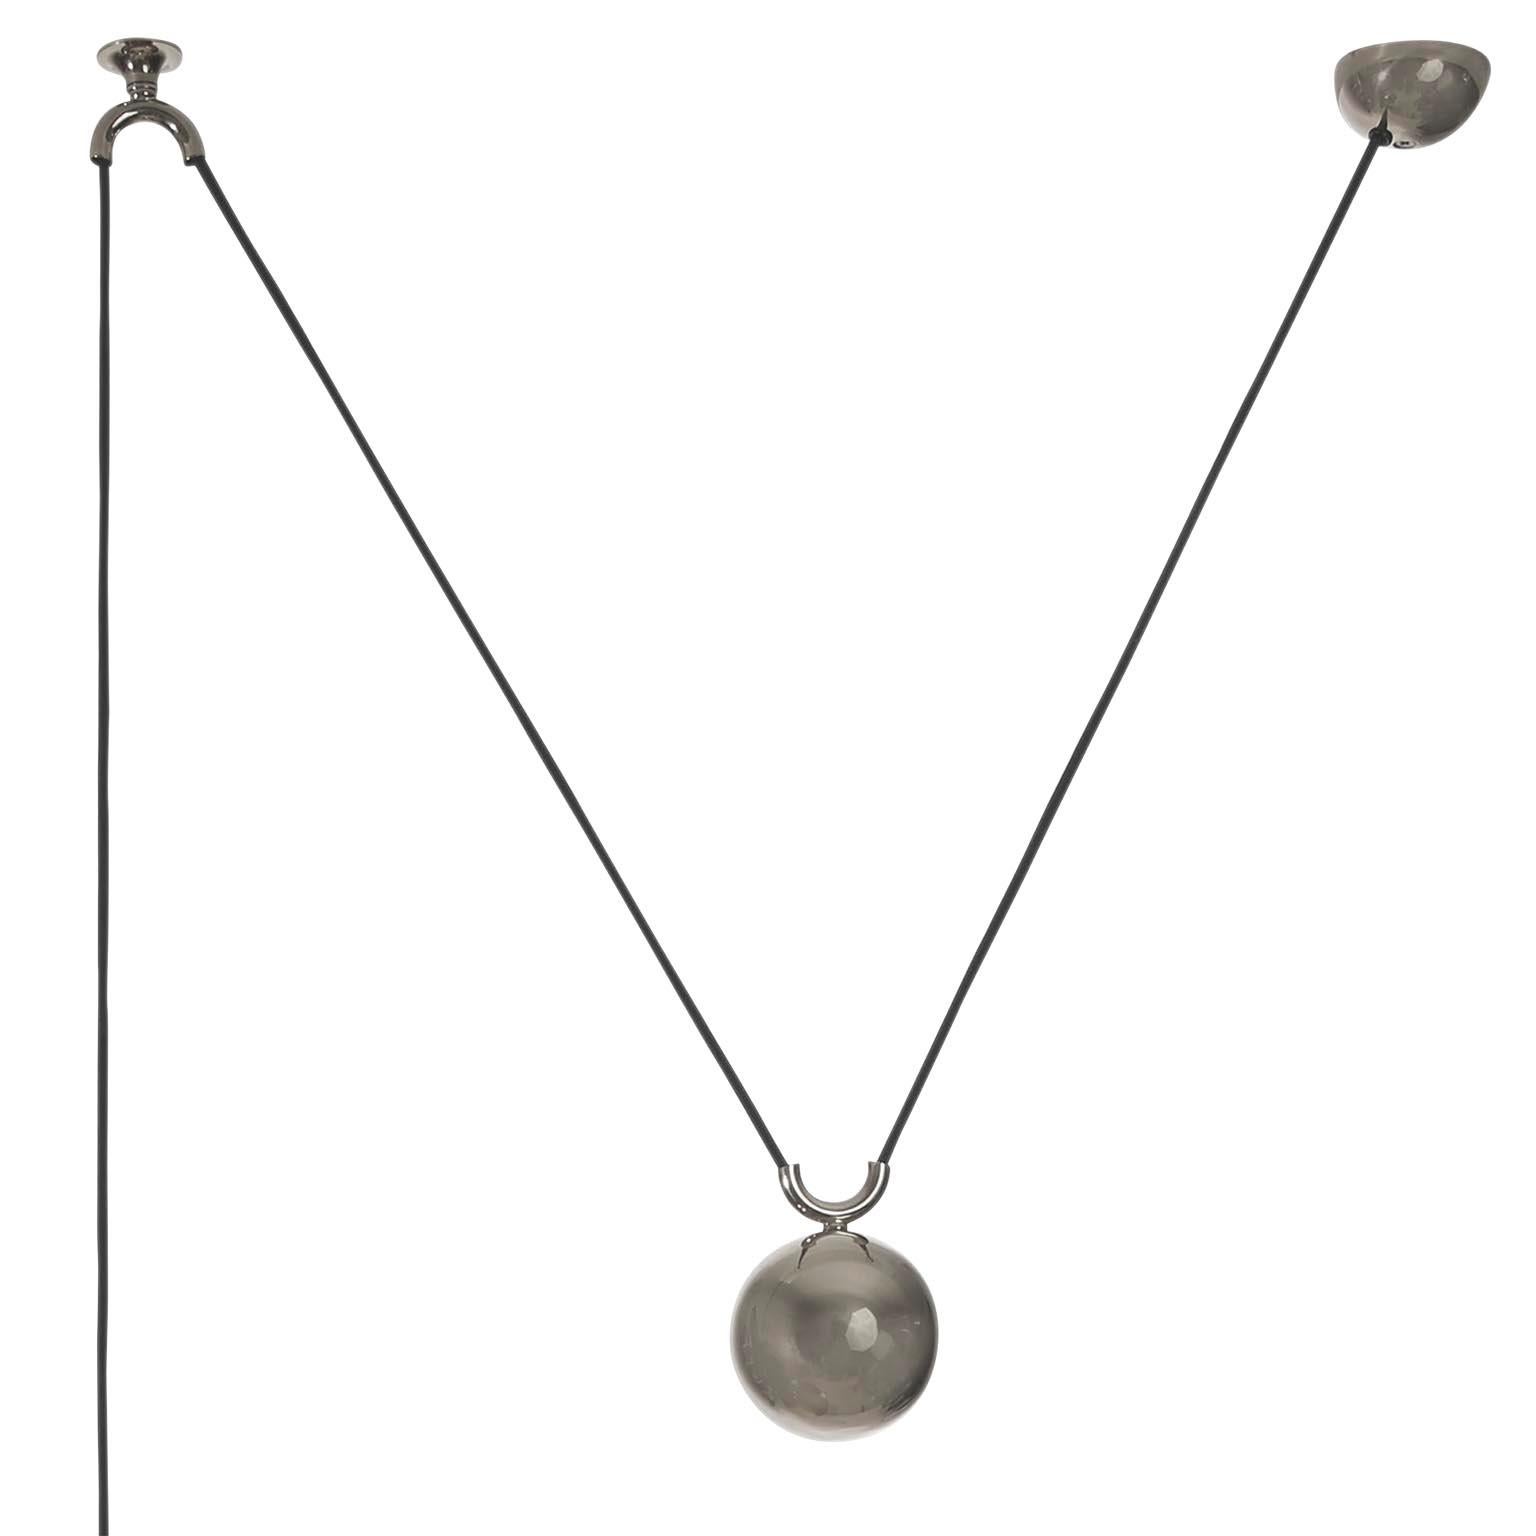 Late 20th Century Florian Schulz Dome Pendant Light, Patinated Nickel, Counterweight, 1970